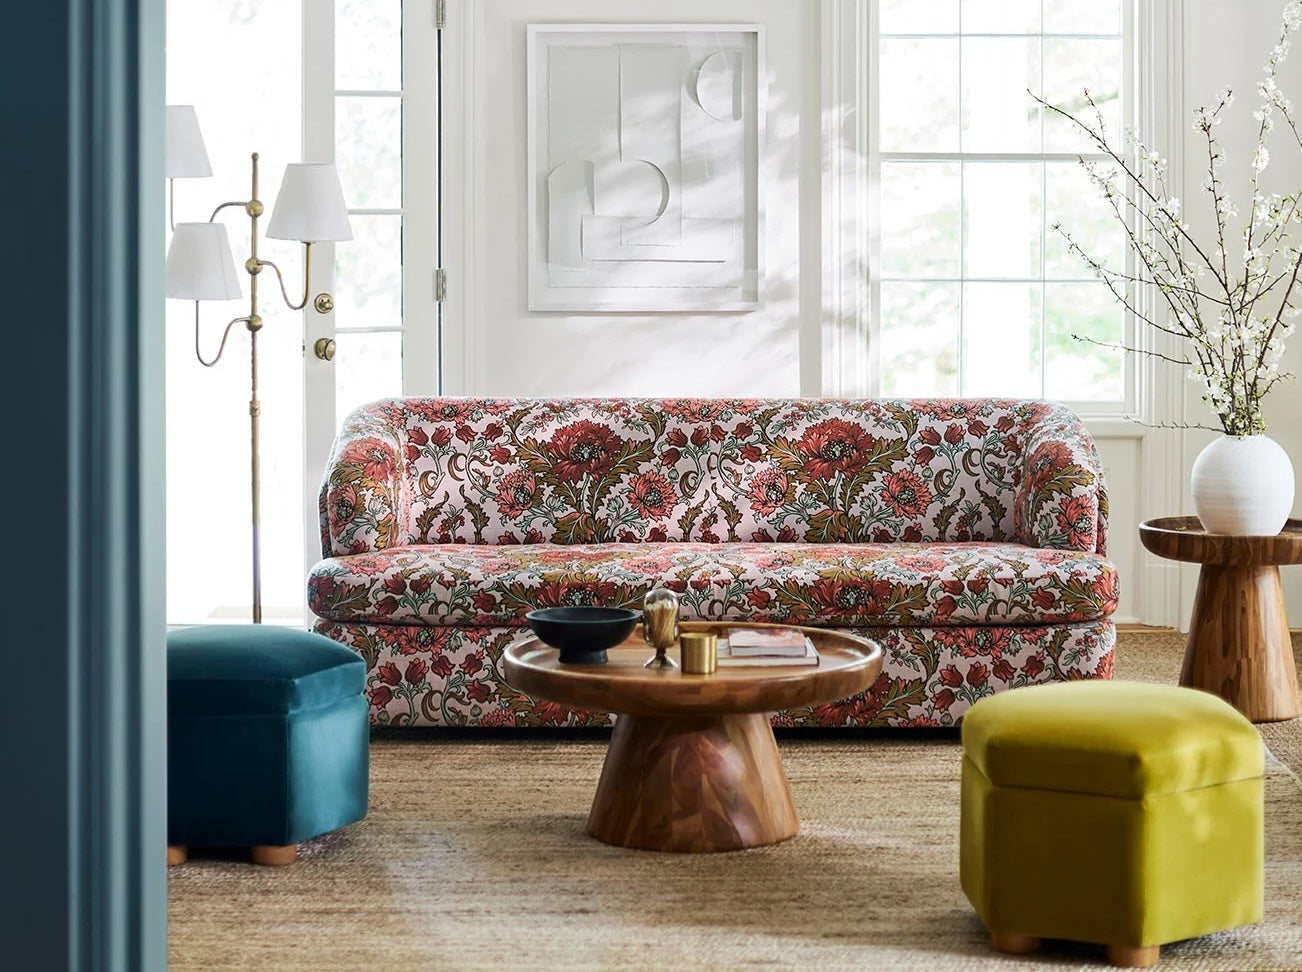 A brightly lit living room featuring a floral-patterned sofa, a wooden coffee table with a black bowl and decor, a blue ottoman, a yellow ottoman, a tall floor lamp, and a framed abstract artwork on a white wall. The space has several large windows and a light, airy feel.